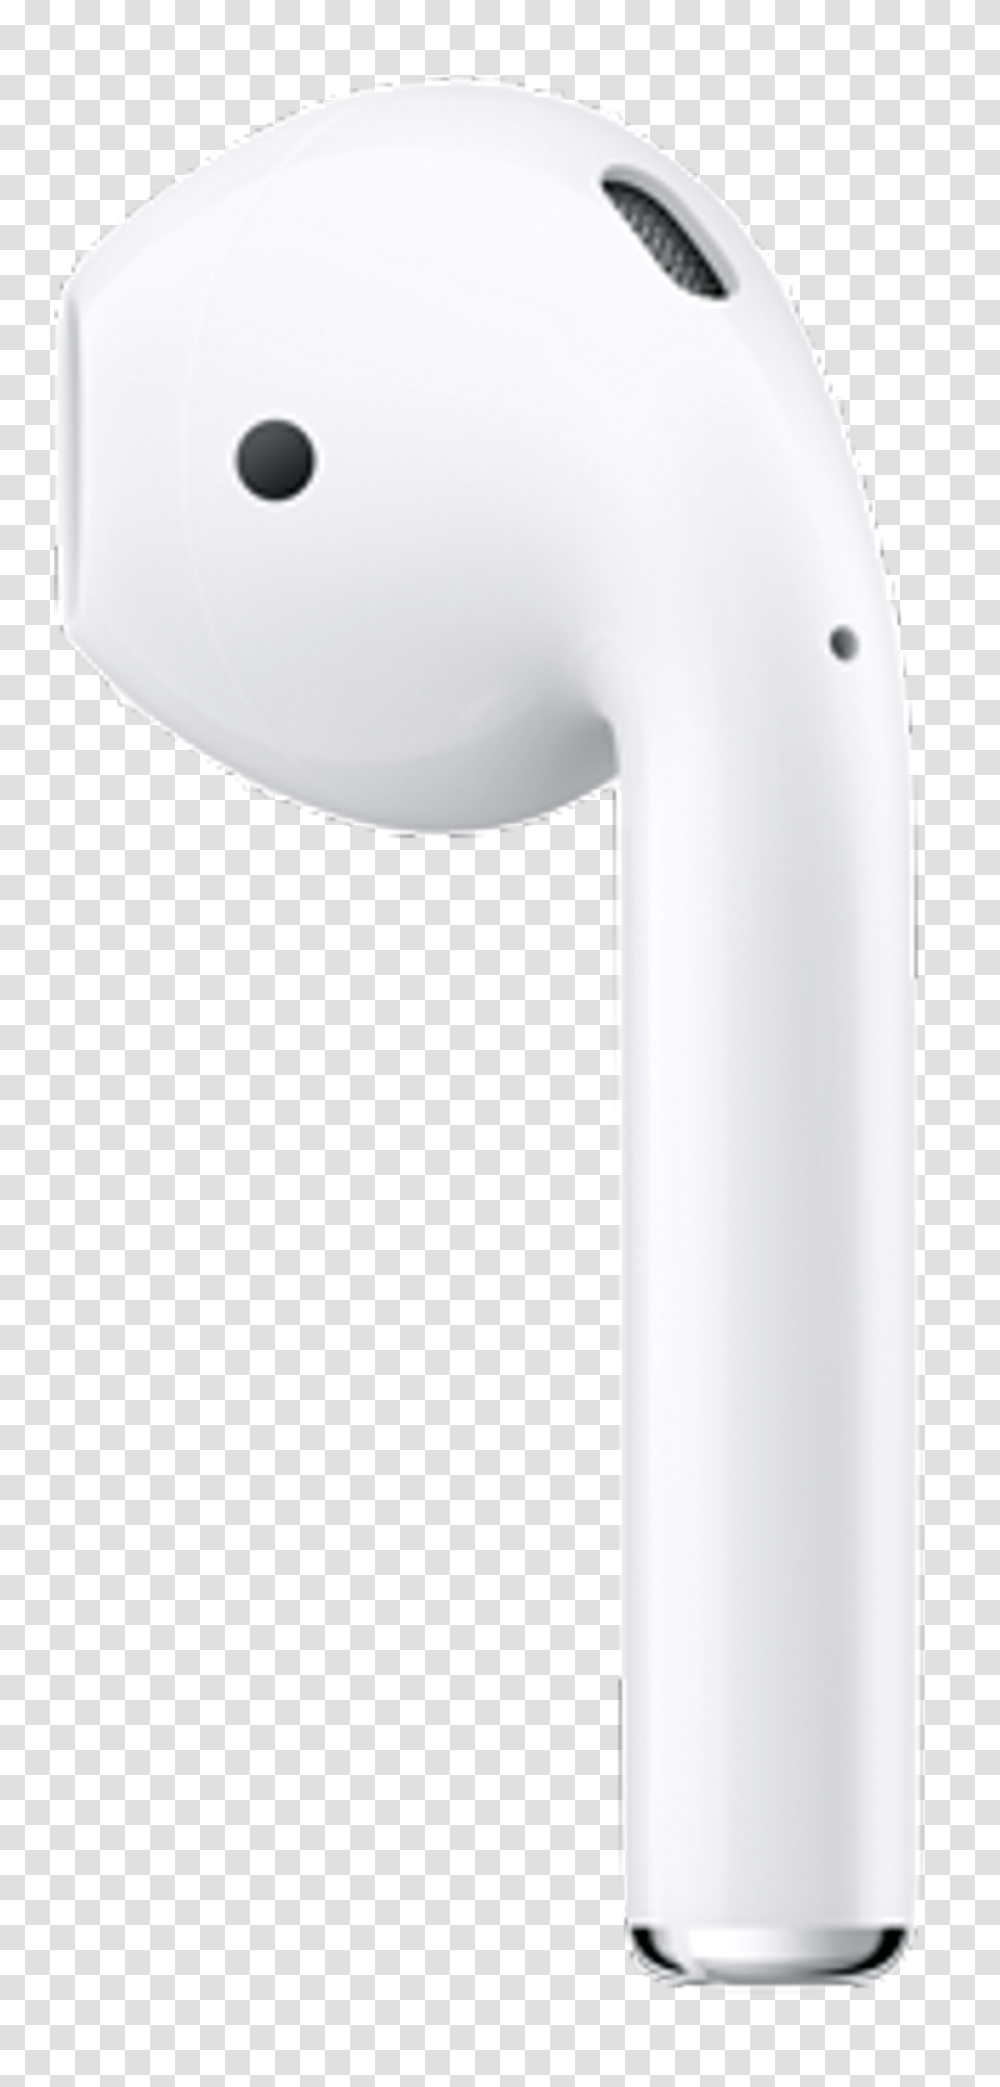 Download Angle Airpods Tap Apple Free Hq Image Clear Background Airpod, Blow Dryer, Appliance, Hair Drier Transparent Png